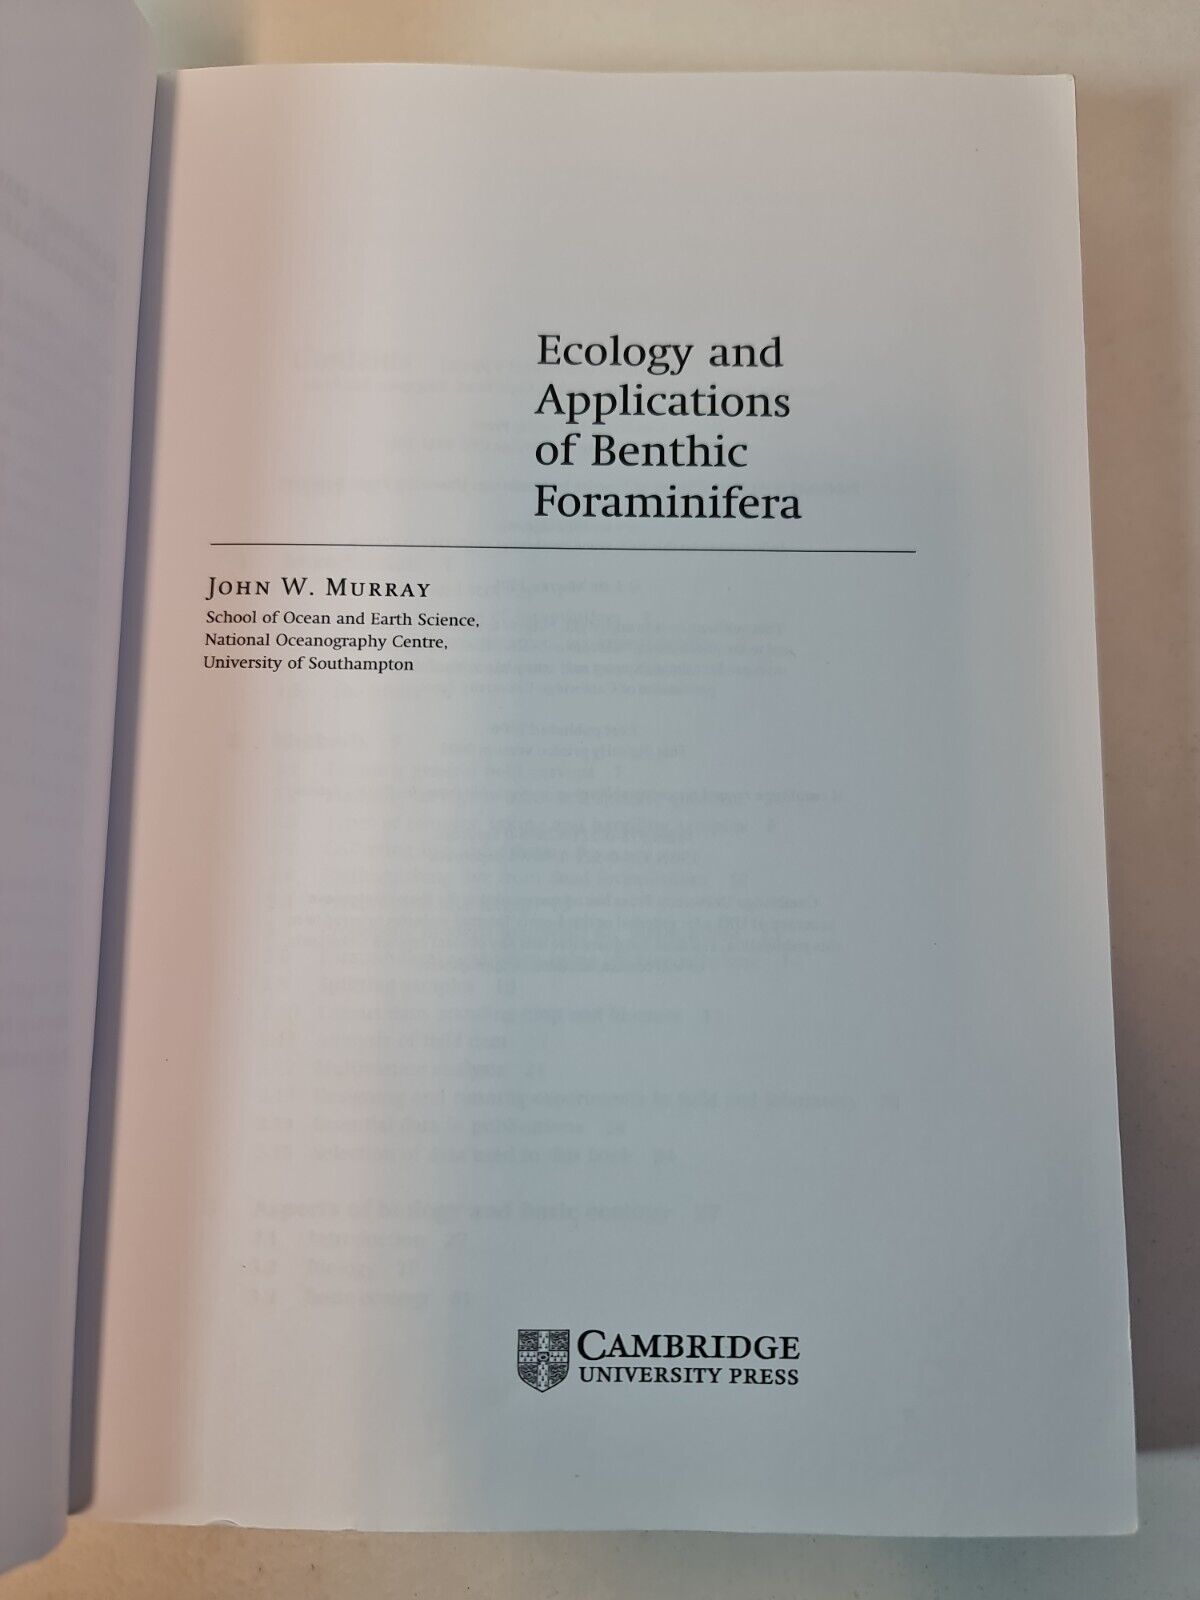 Ecology and Applications of Benthic ... by John W. Murray (2008)